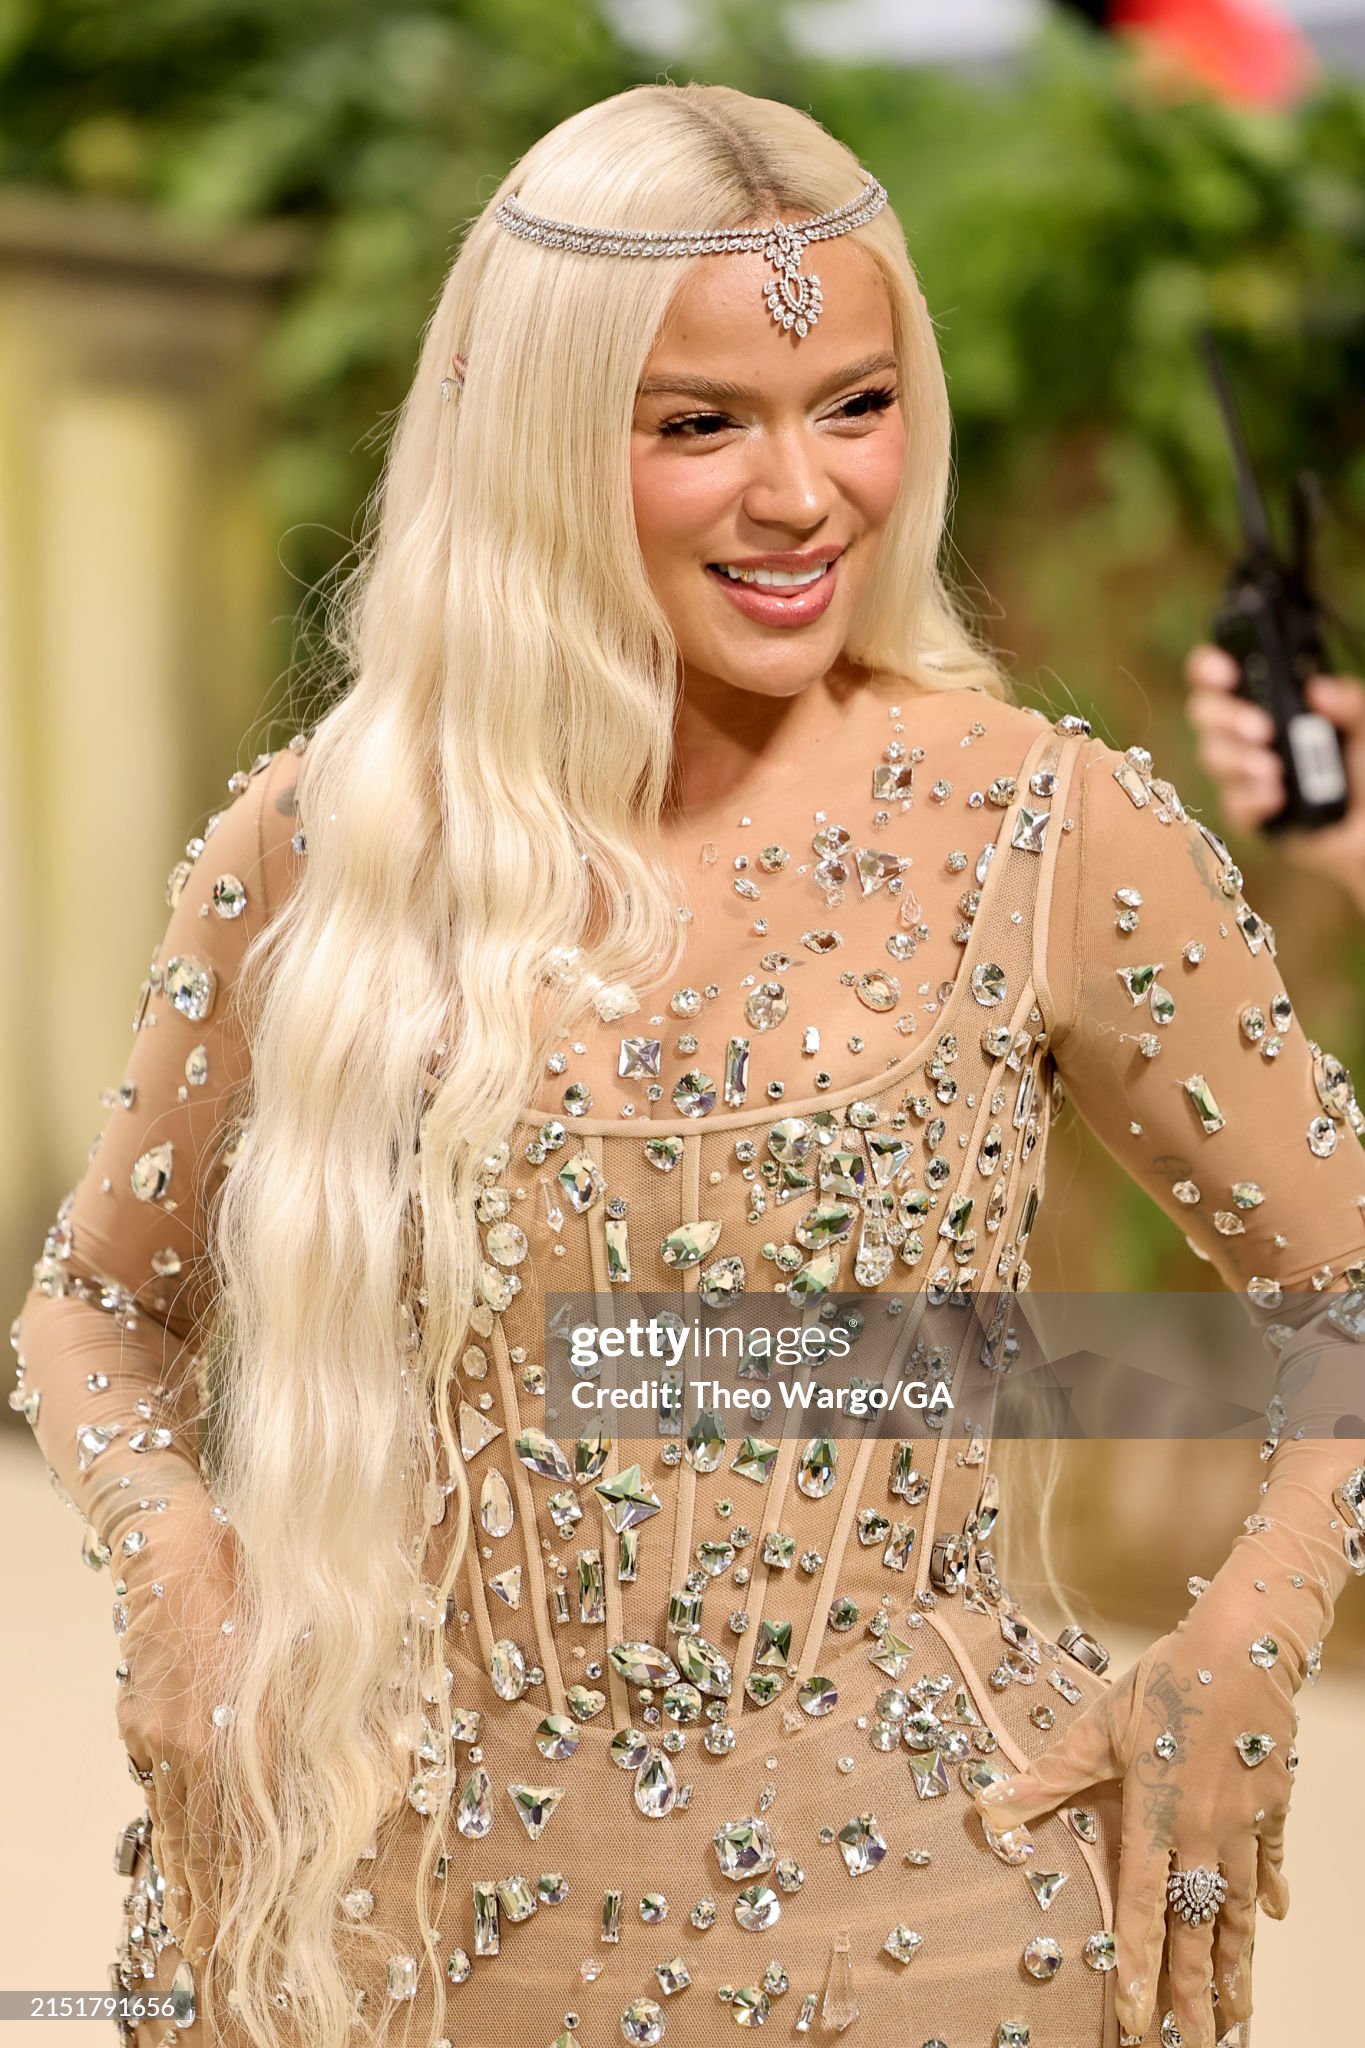 gettyimages-2151791656-2048x2048.jpg